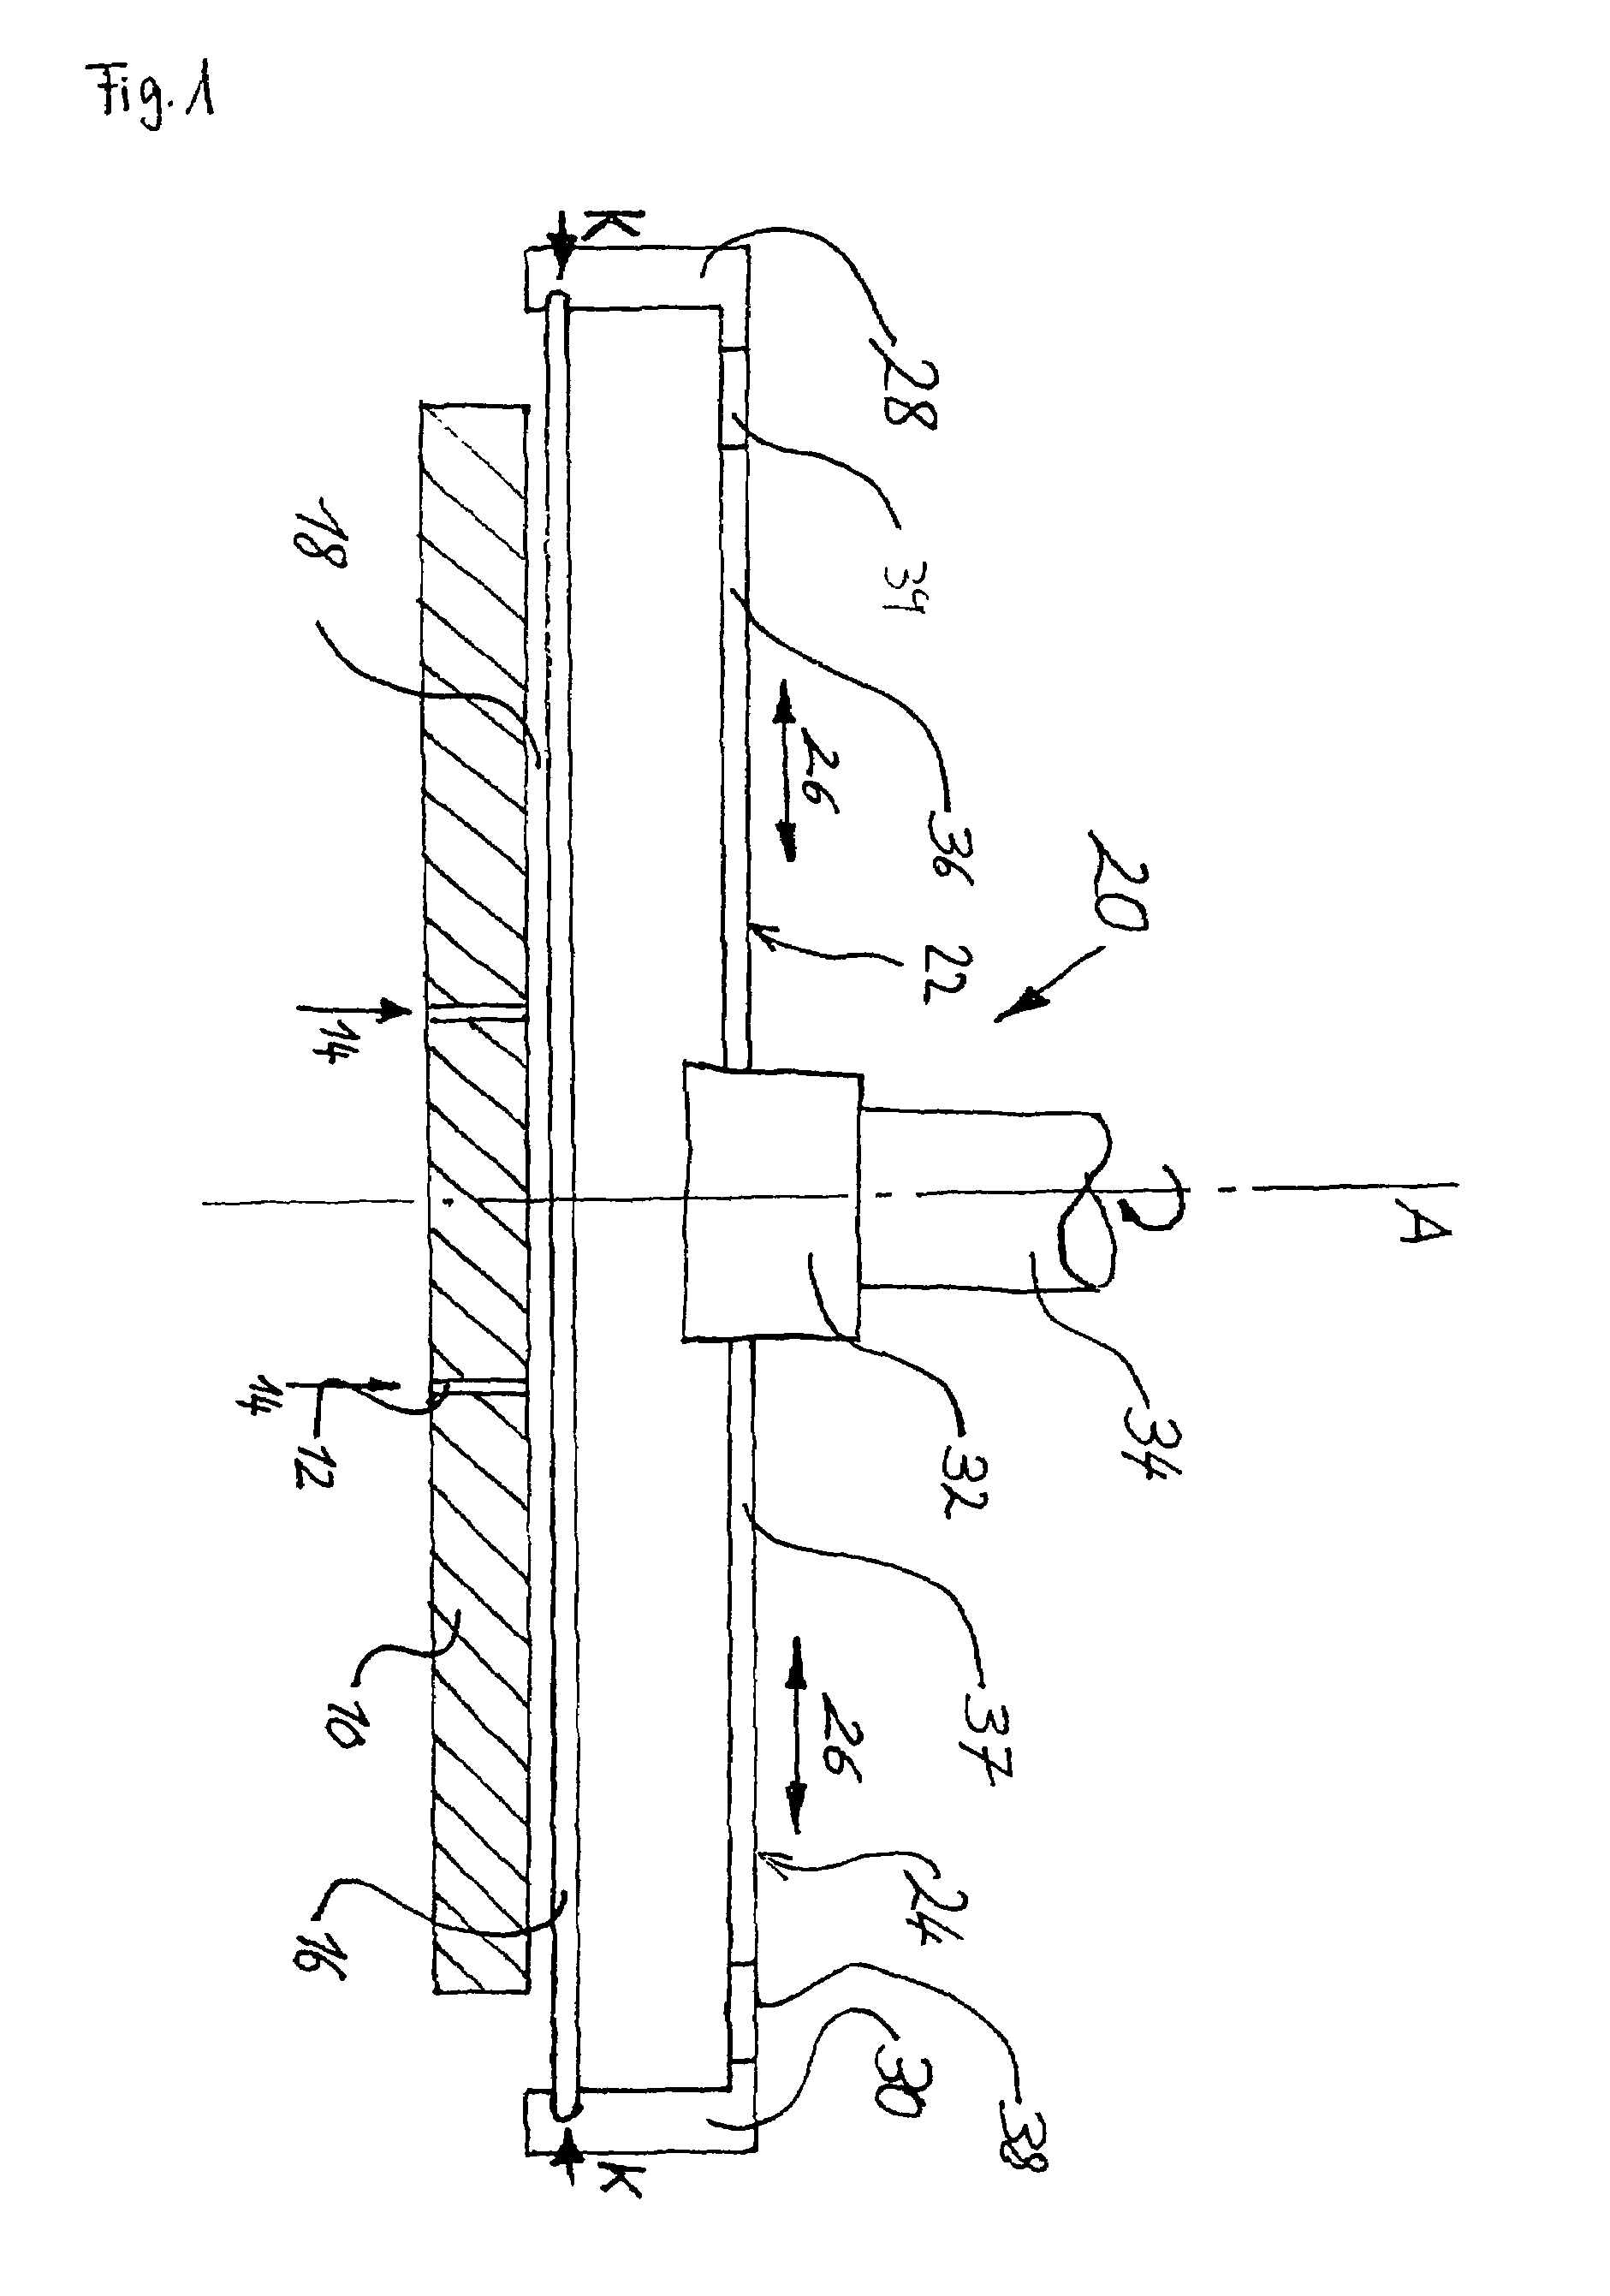 Holding and turning device for touch-sensitive flat objects